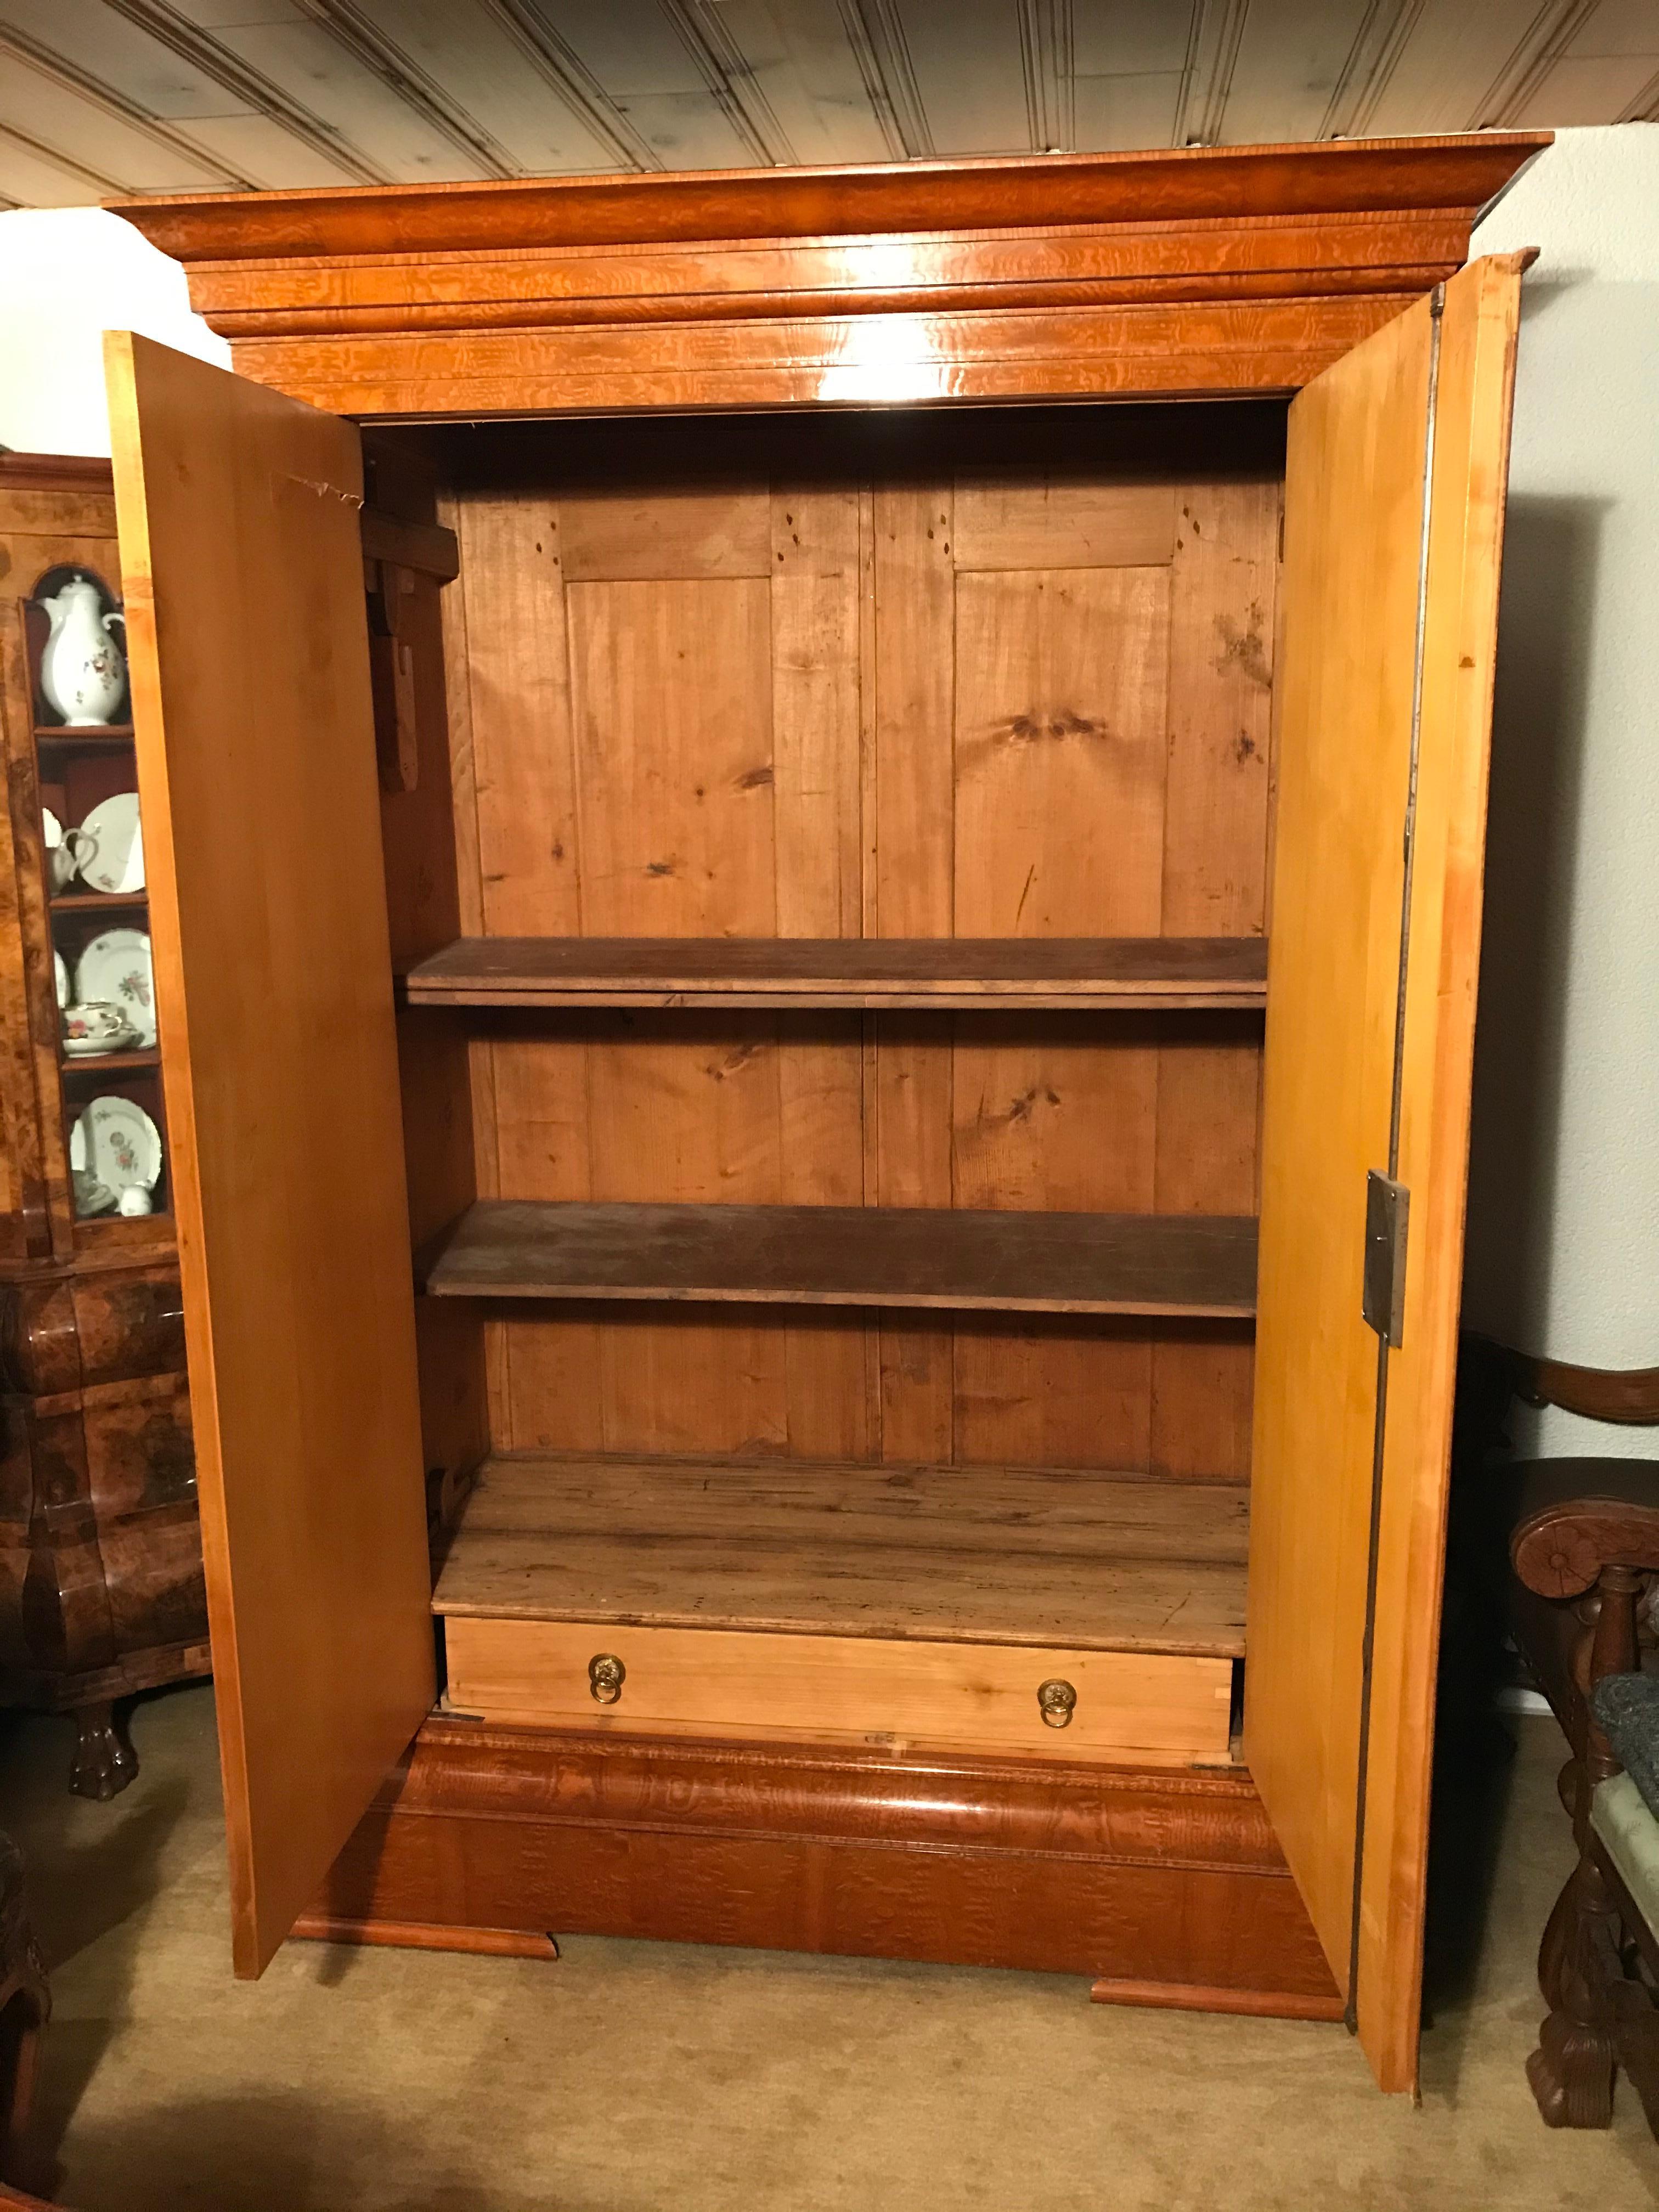 Biedermeier Wardrobe, Baltic States 1810-1820, Bird’s-eye maple veneer, filament inserts on the doors and the pilaster strips. Inside one drawer and a coat rack. Two shelves have been added later. The wardrobe is in very good condition. It will ship